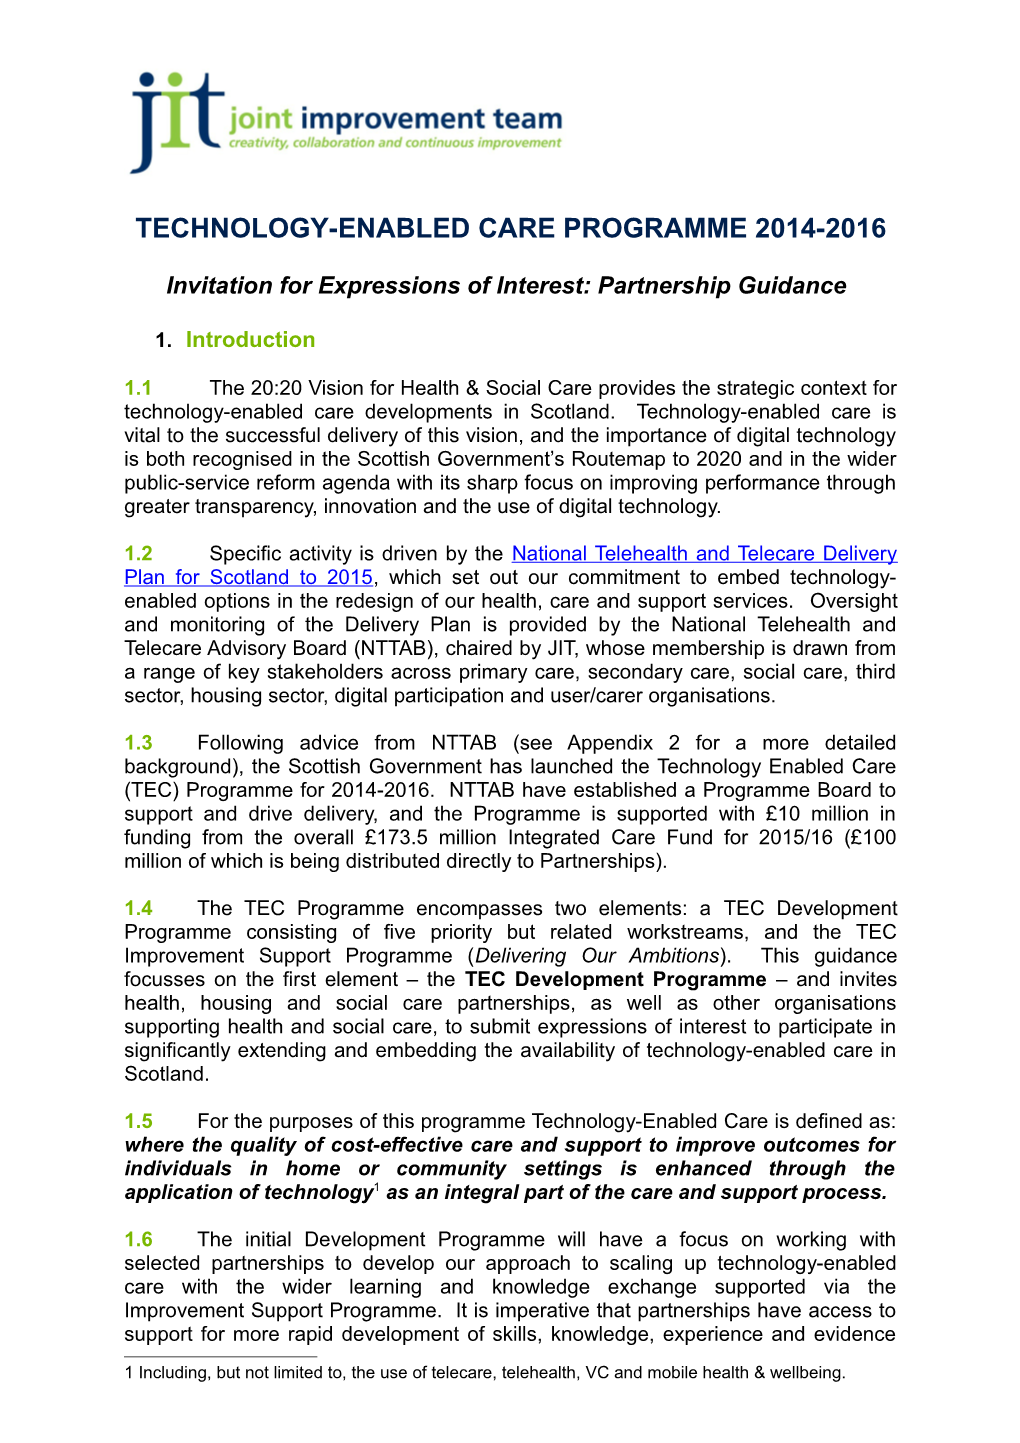 Technology-Enabled Care Programme 2014-2016